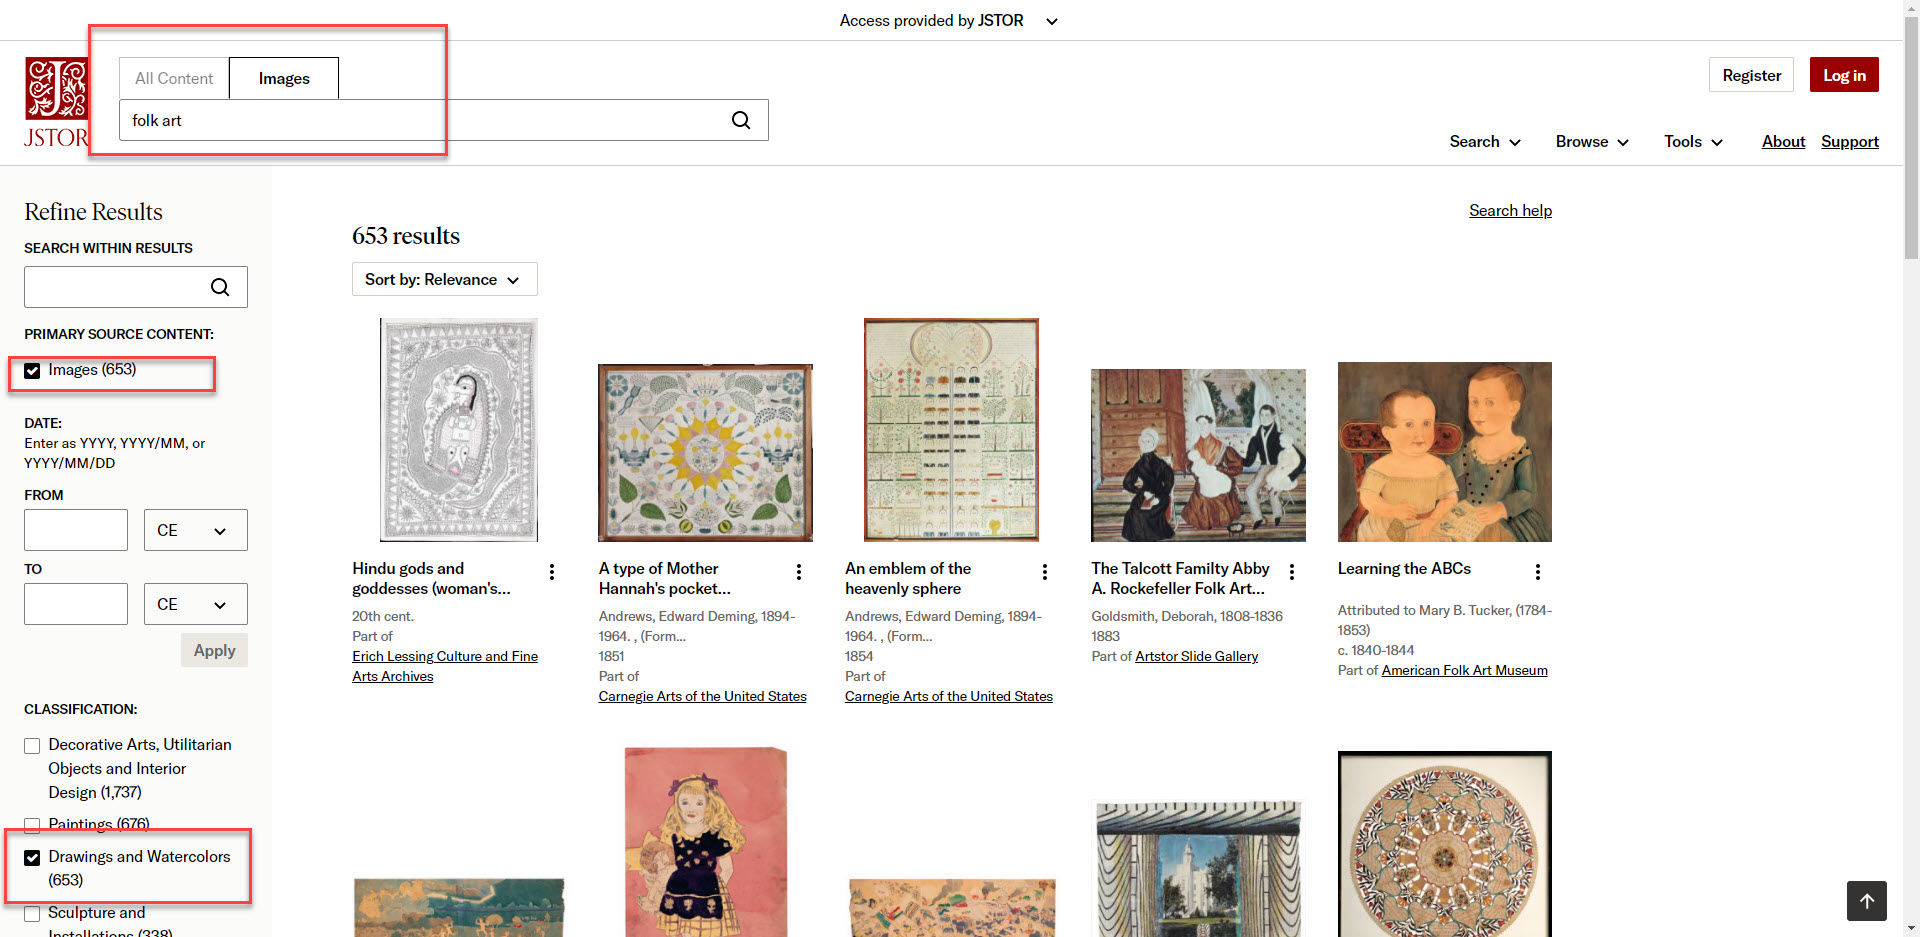 Image Results for folk art filtered by Classification Drawings and Watercolors.jpg